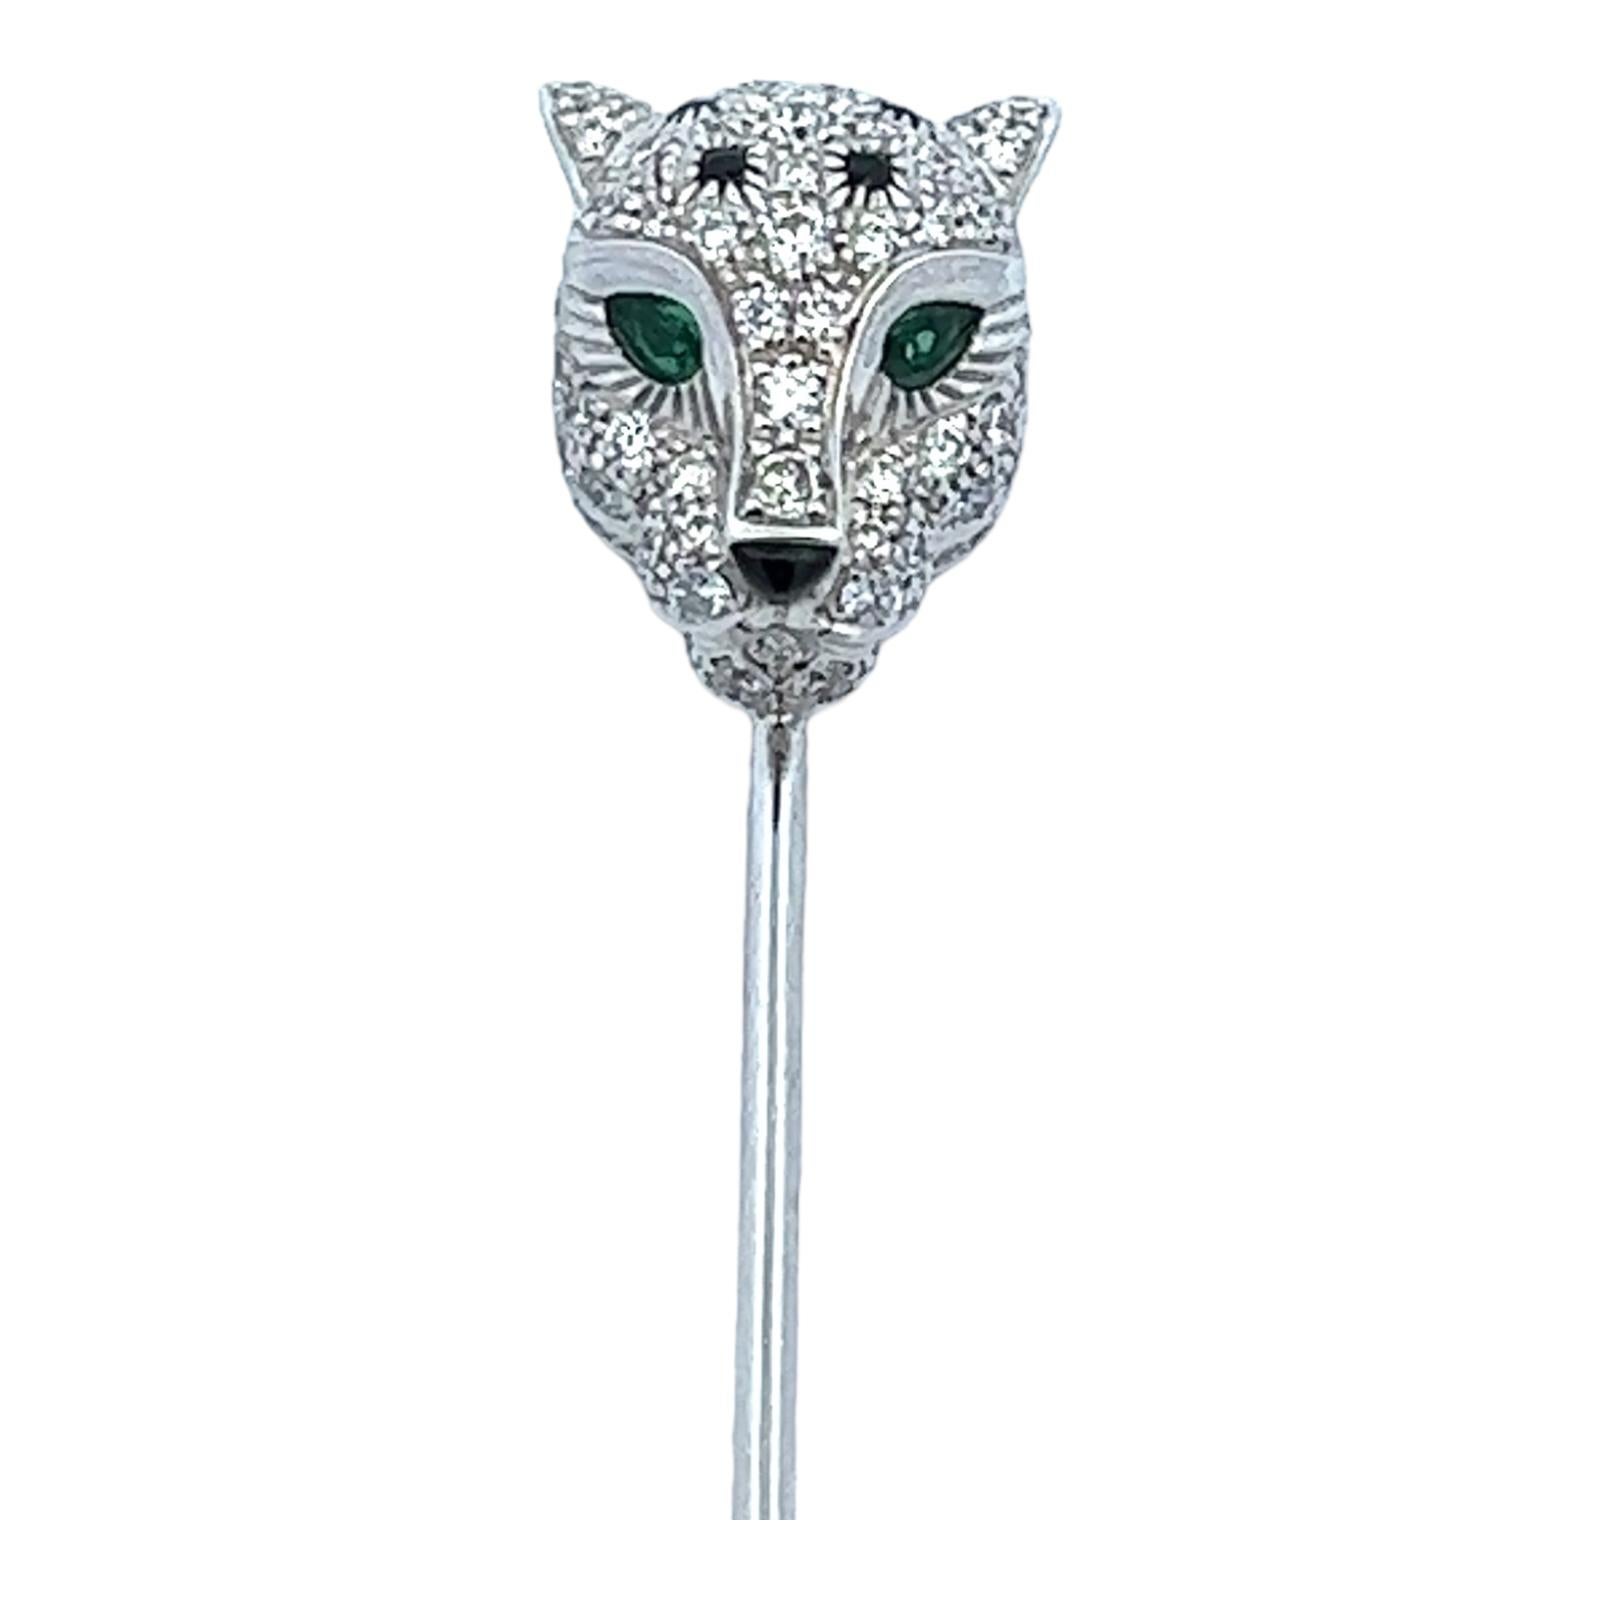 Panthère de Cartier diamond jabot pin, circa 2019, crafted in 18 karat white gold. The pin features 159 round brilliant cut diamonds weighing 1.04 CTW, emerald and onyx accents. The diamonds are graded D-E color VVS clarity. The modern brooch